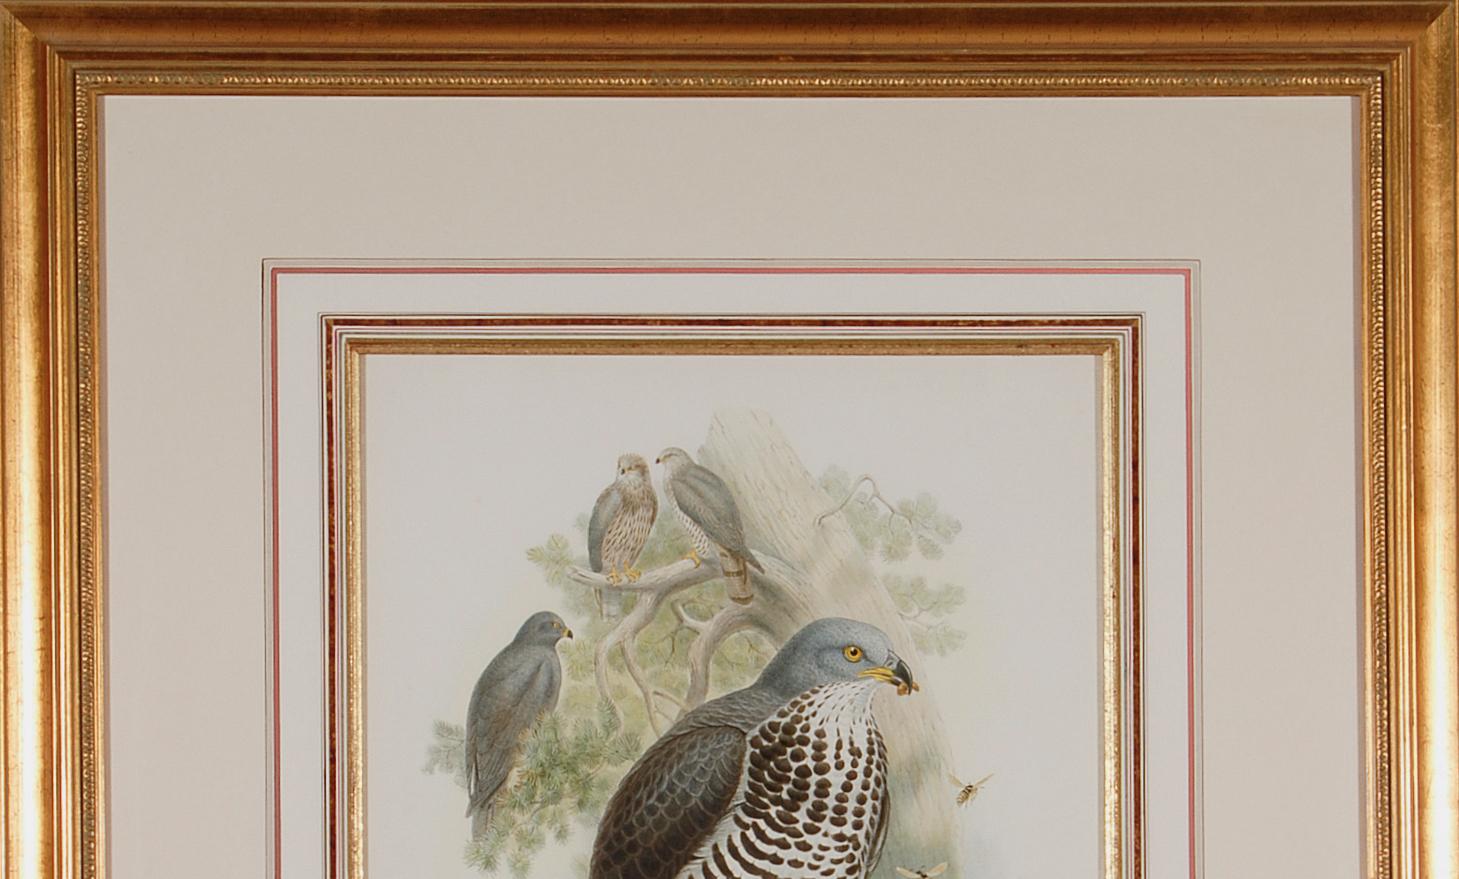 Honey Buzzard Bird: A Framed Original 19th C. Hand-colored Lithograph by Gould - Naturalistic Print by John Gould and Henry Constantine Richter